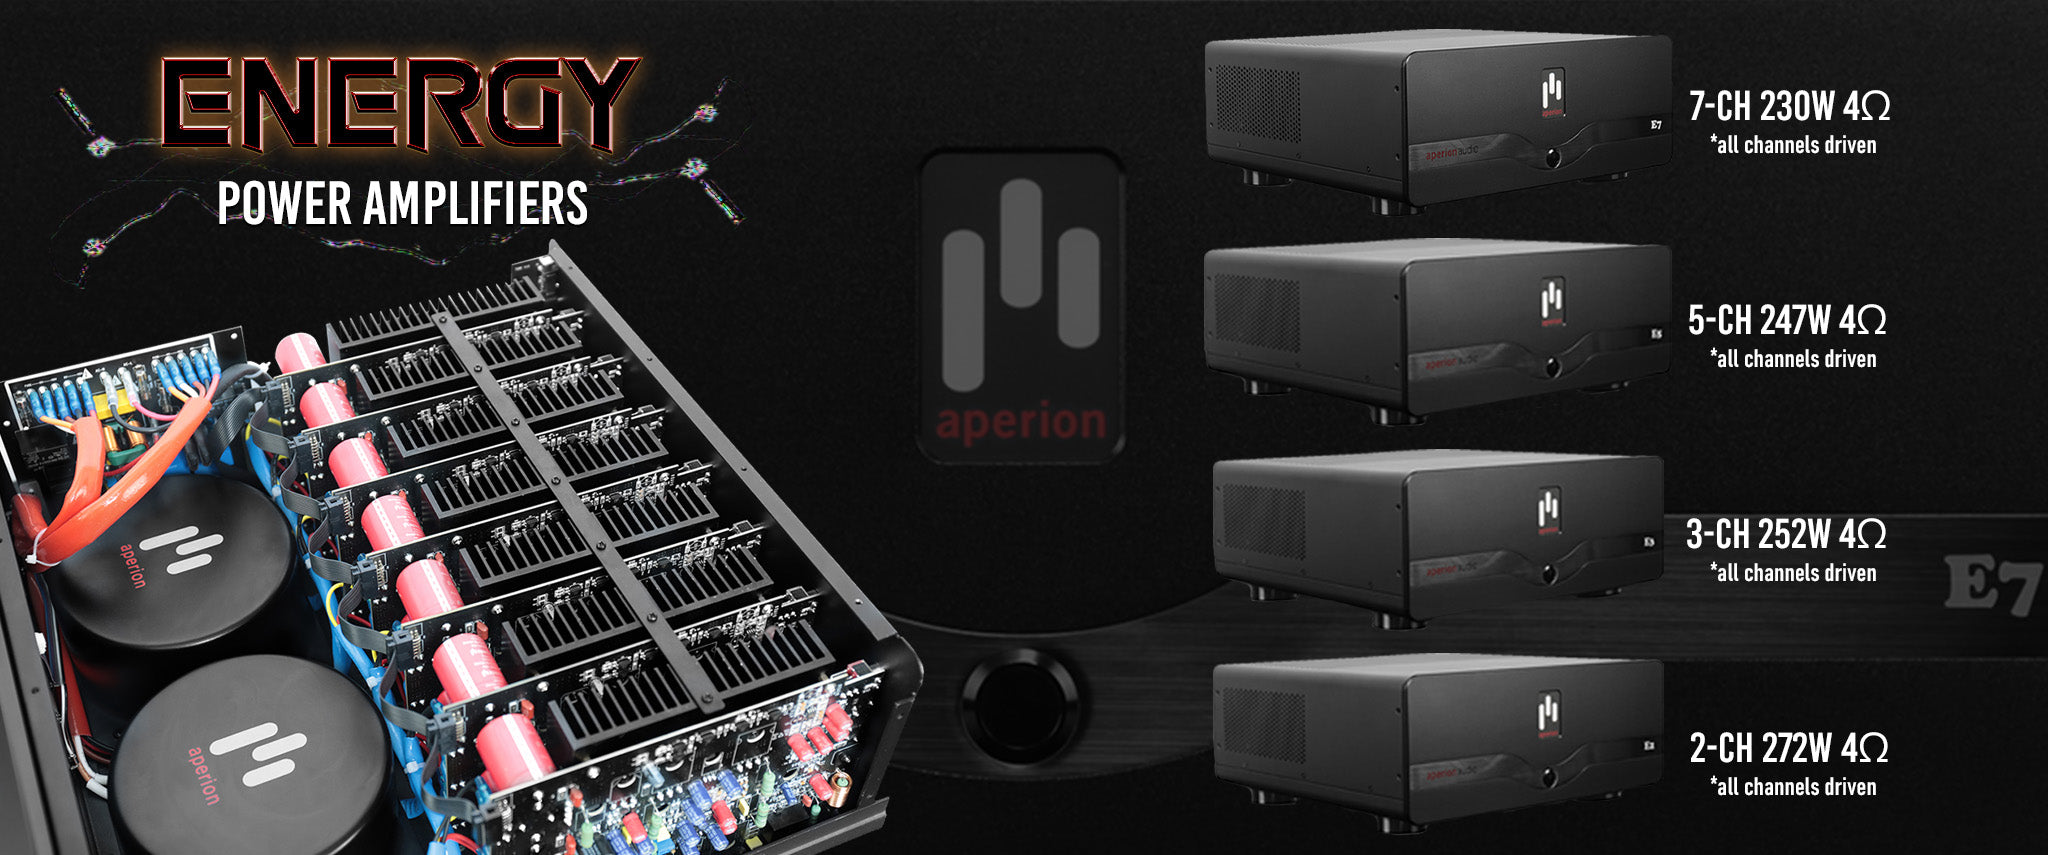 aperion-audio-energy-power-amplifiers